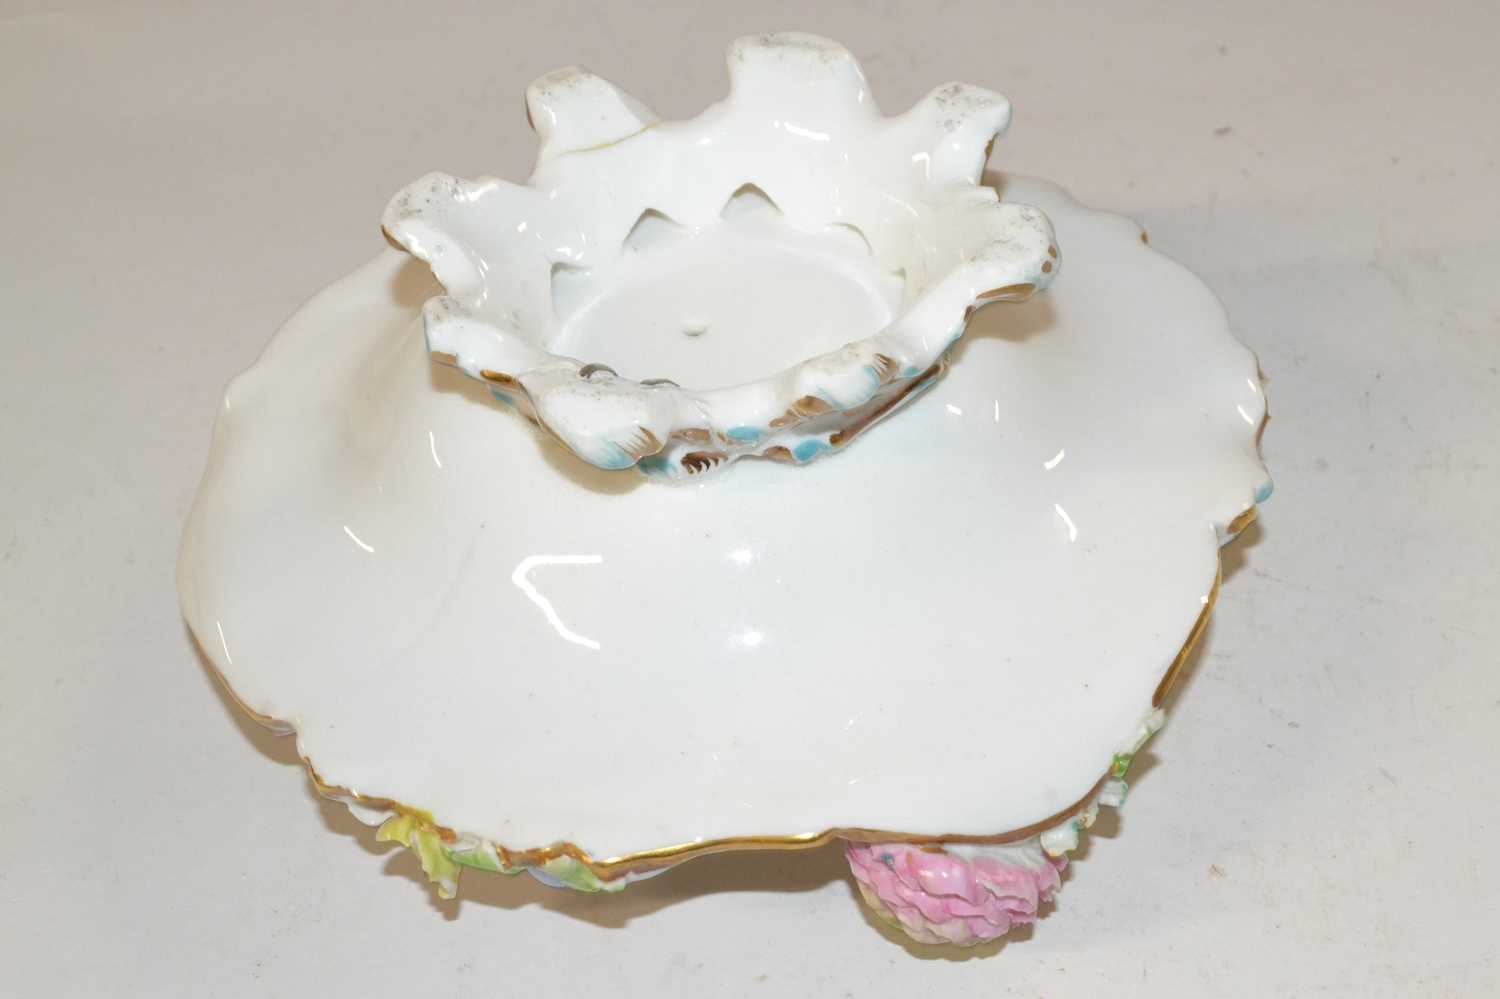 A 19th Century porcelain candle holder painted with floral sprays and flowers in relief - Image 3 of 3